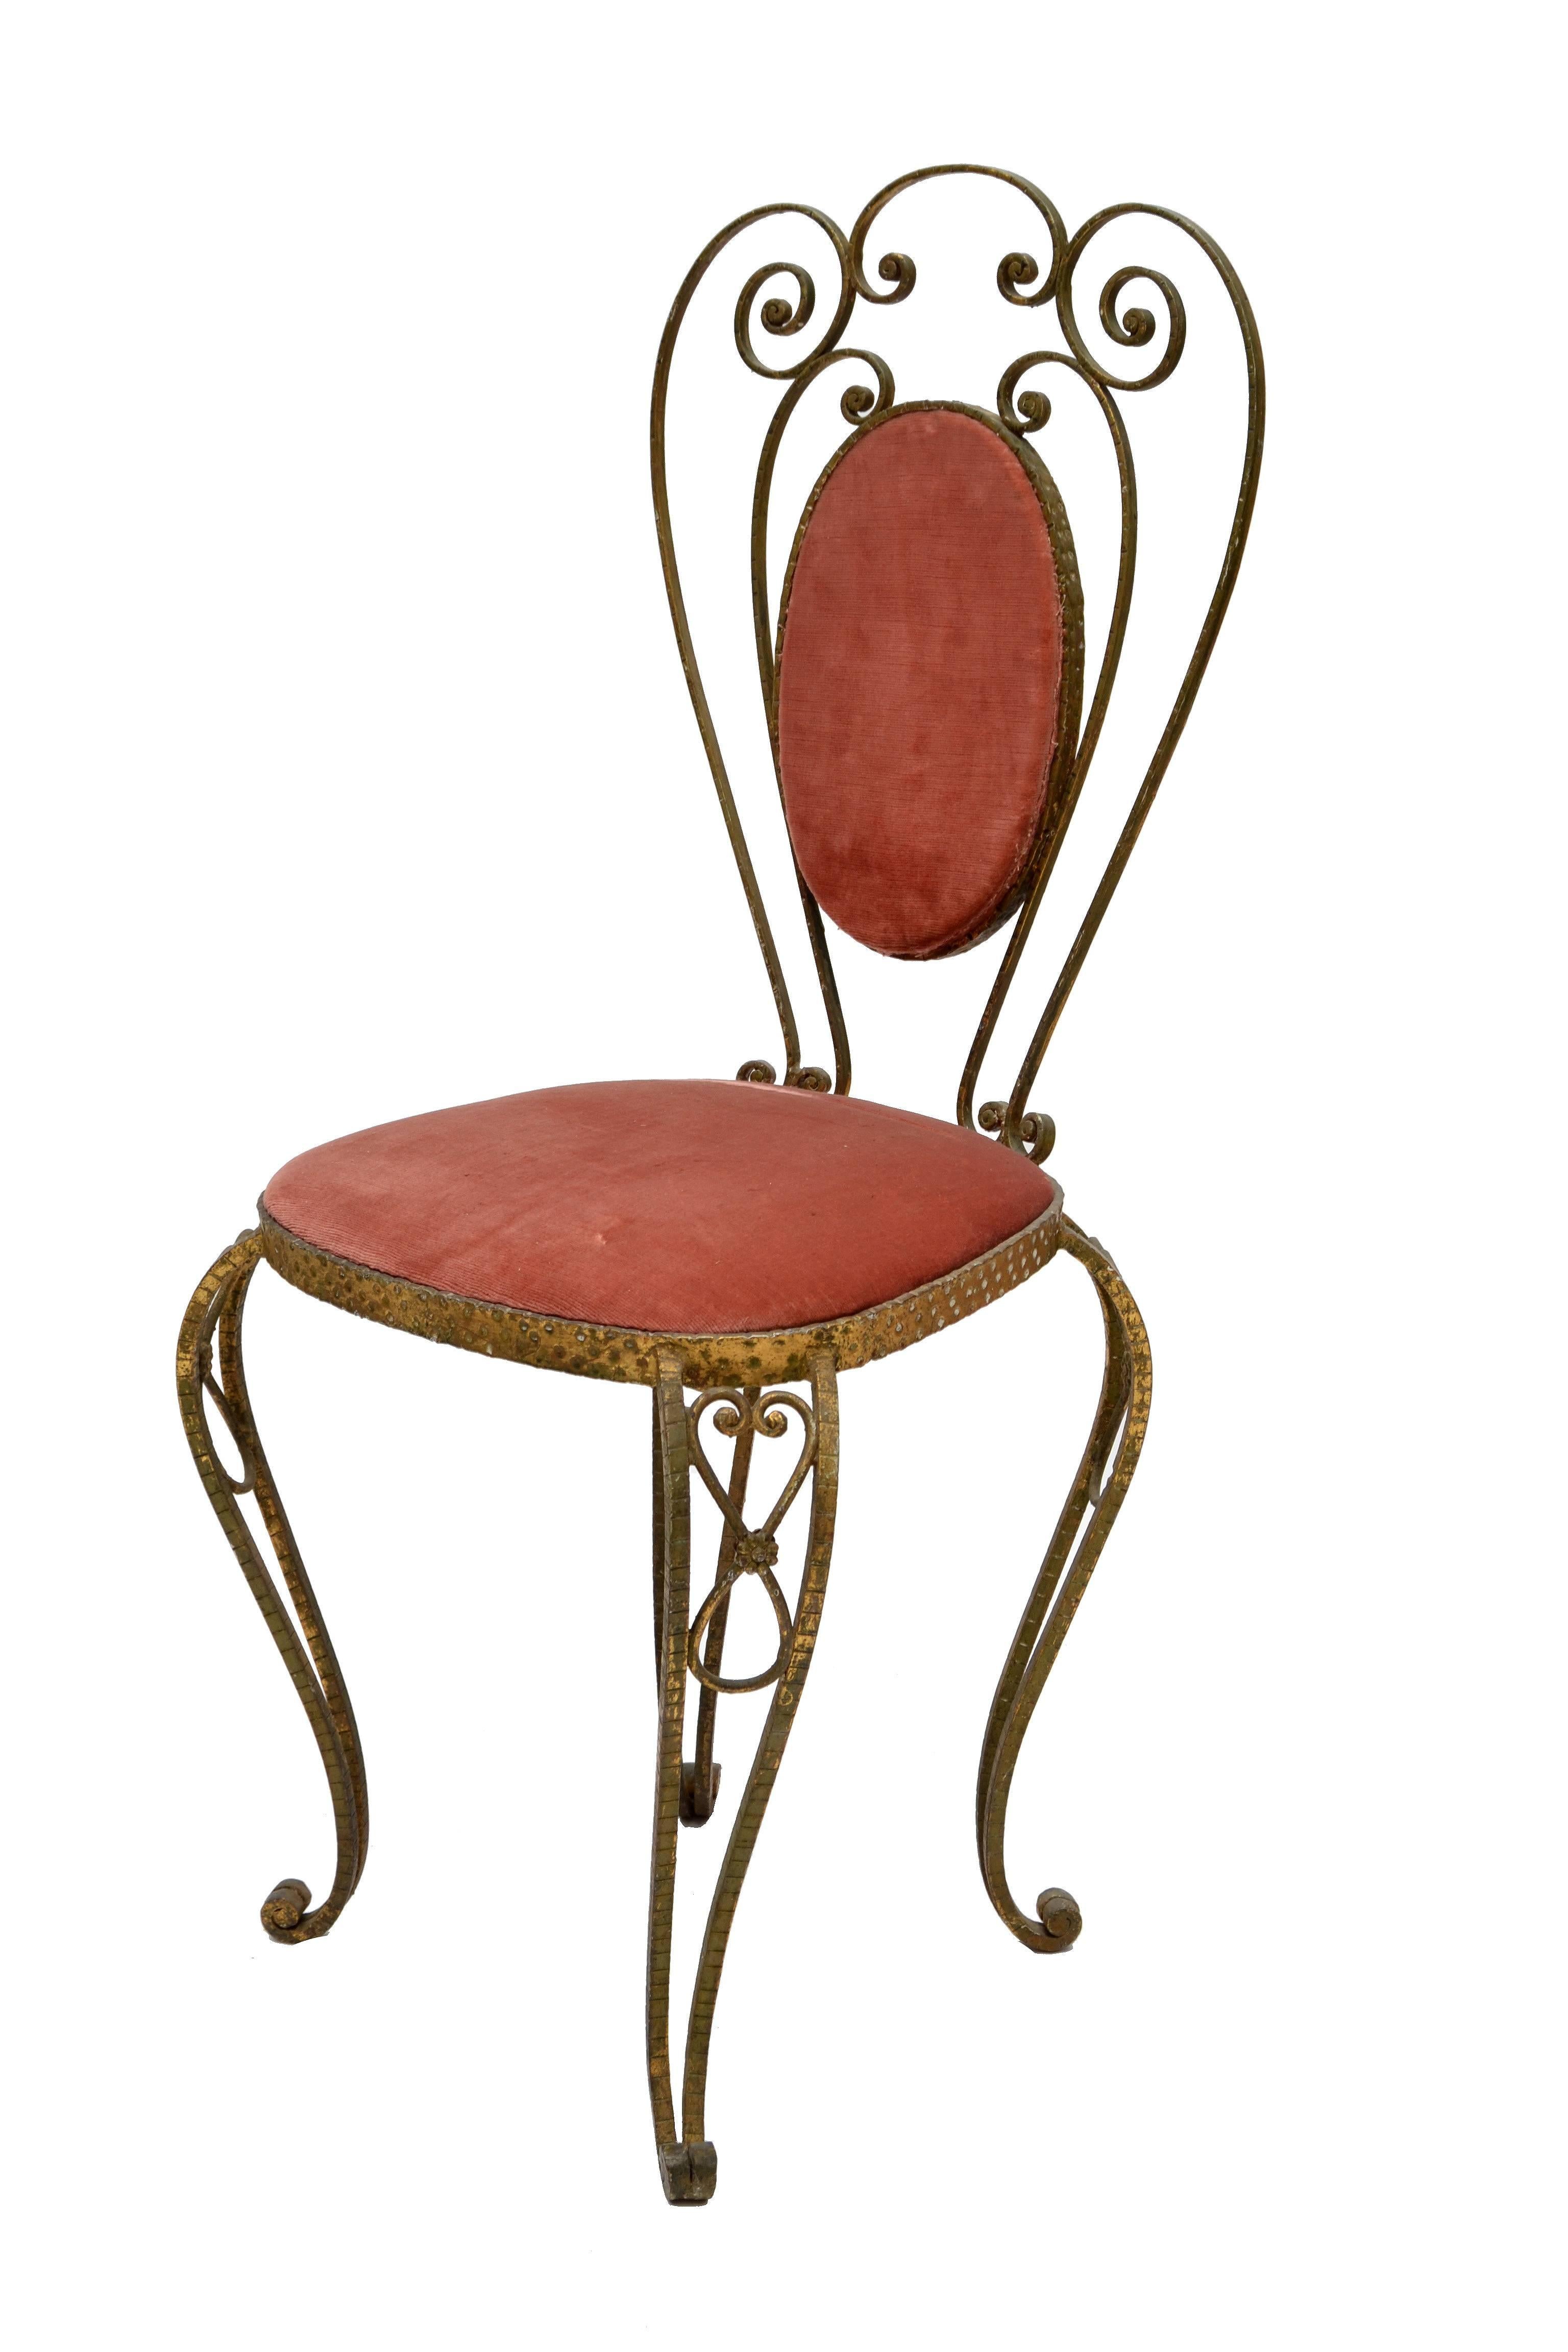 Whimsical Art Deco Style Italian gold leaf hand-hammered wrought iron vanity chair in golden finish with pink velvet upholstery by Pier Luigi Colli.
In good vintage condition, we recommend having the Chair newly upholstered.

     
   